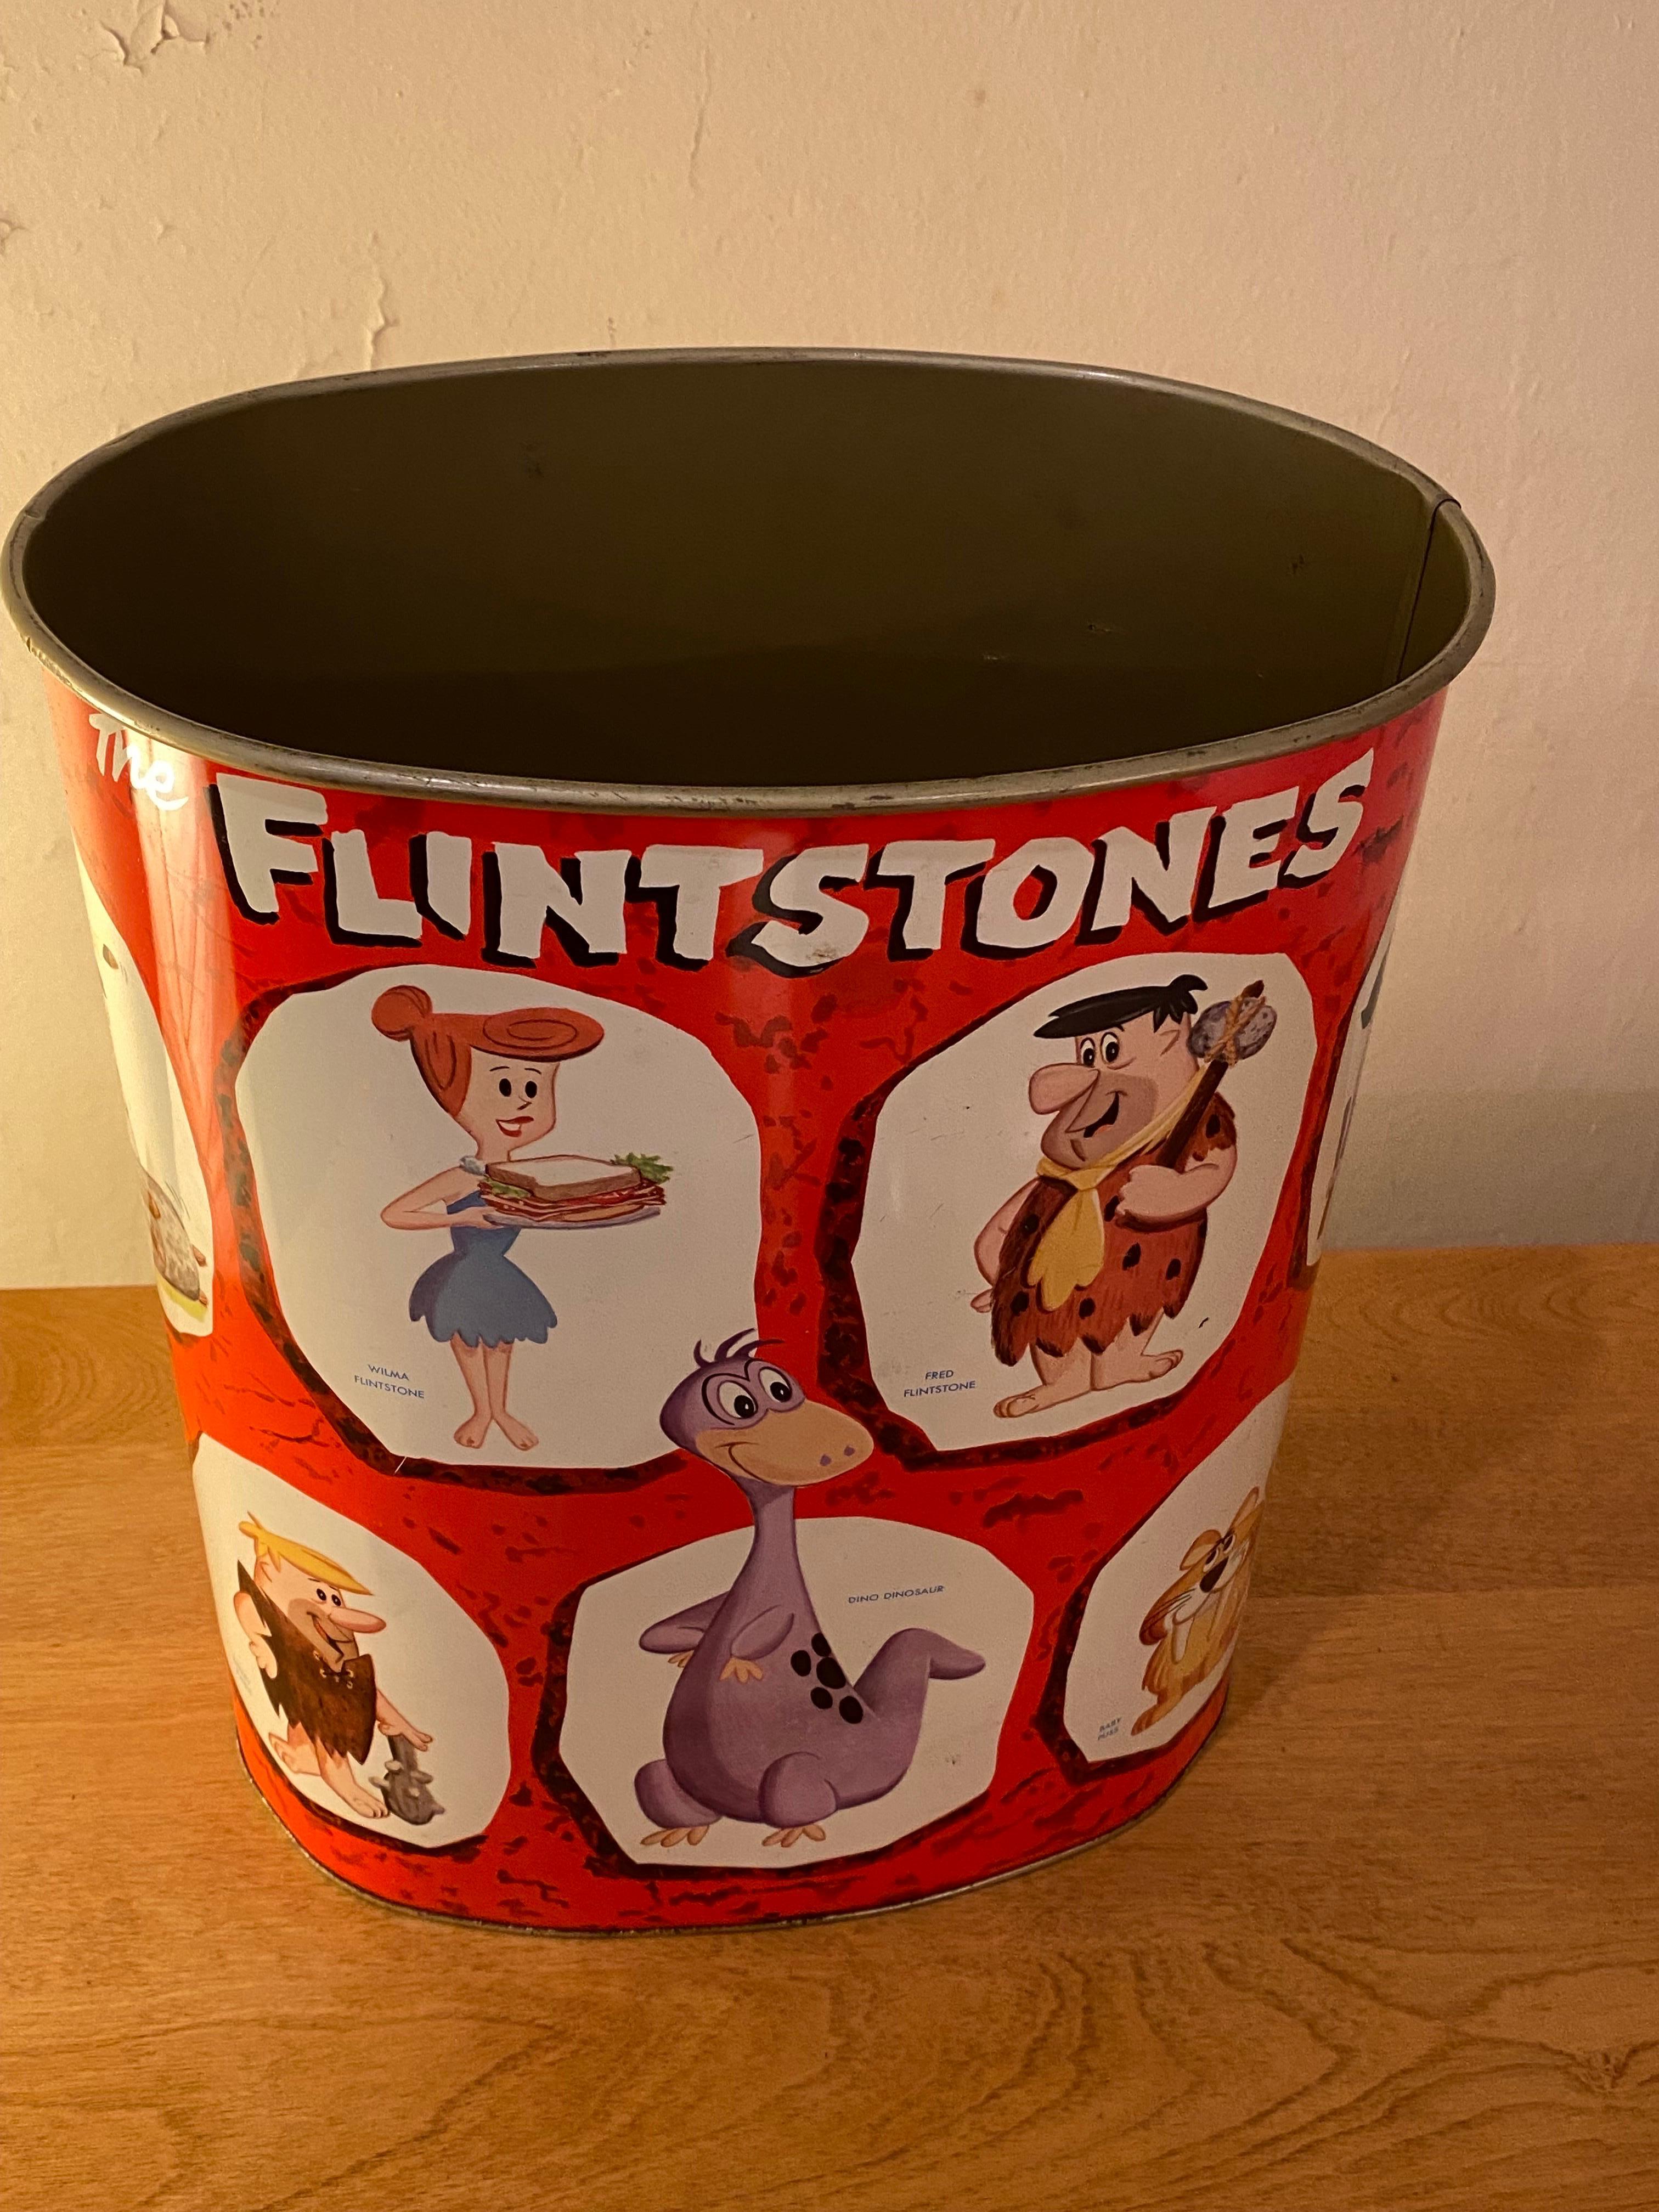 Flintstones Metal Trash Can. In very clean original condition! Colors bright with minimal wear to graphics.